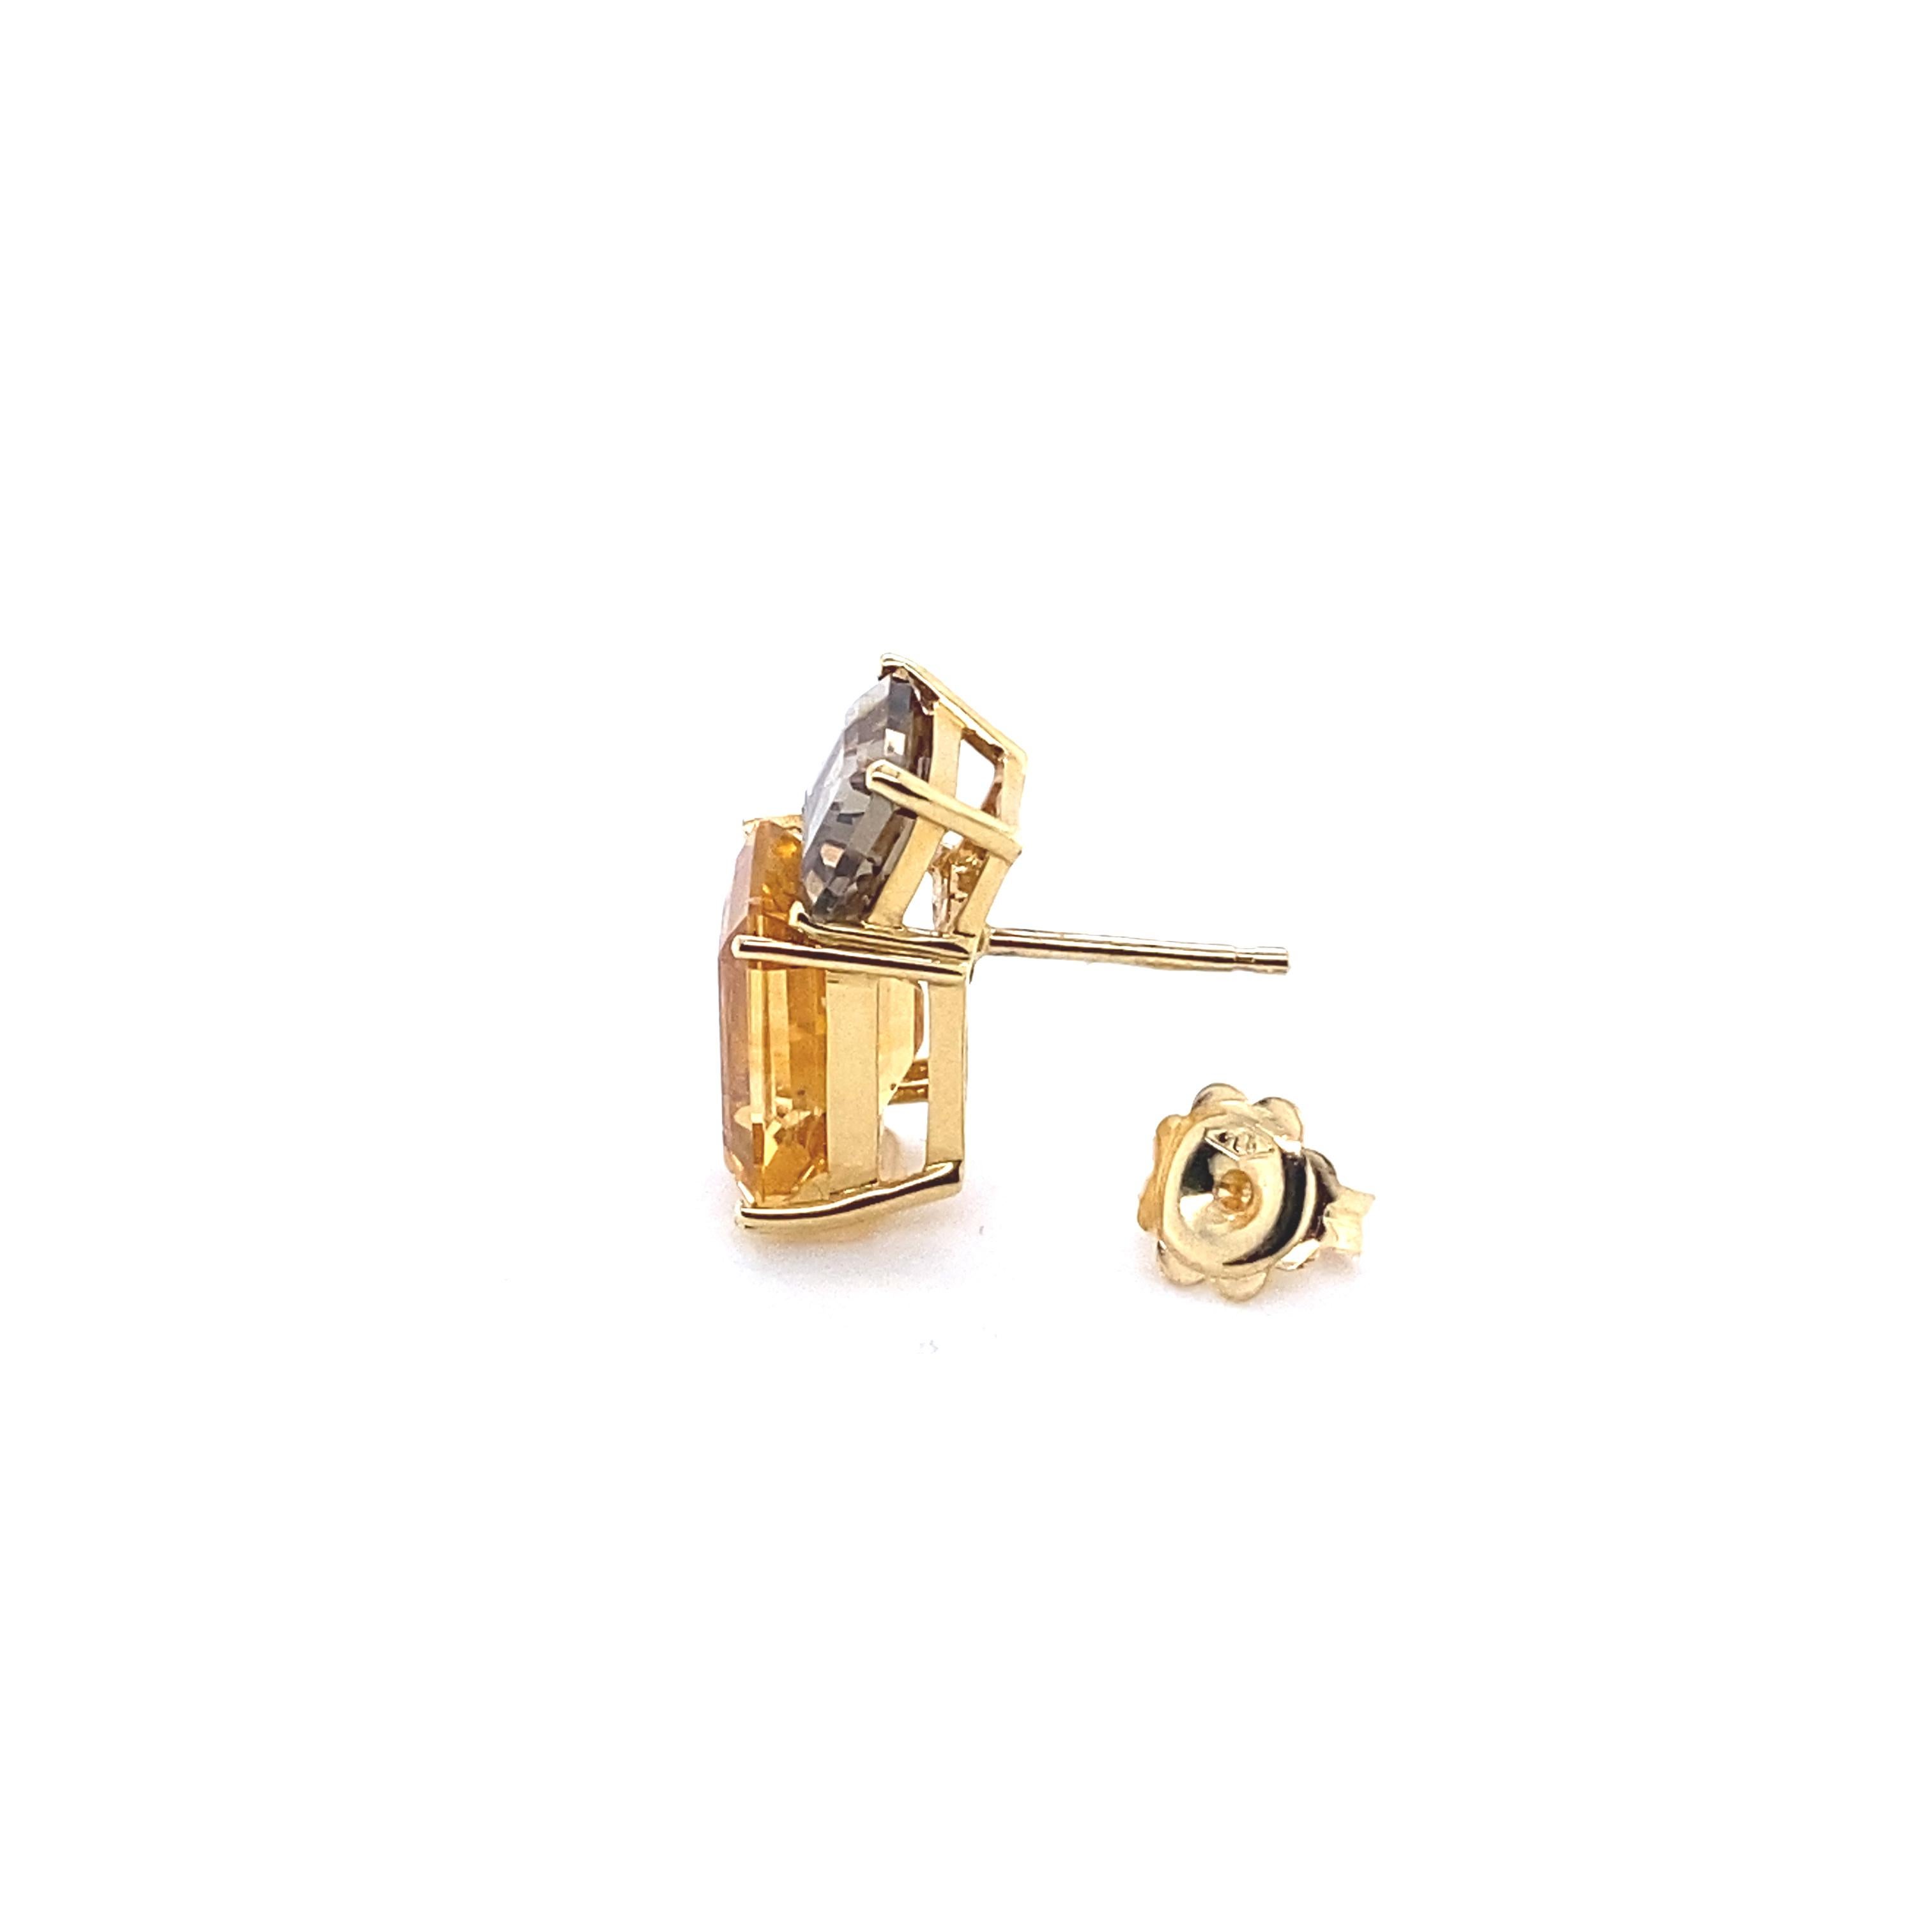 French Yellow Gold Earrings Accompanied by a Smoky Quartz with an Citrine
French Collection by Mesure et Art du Temps.

18 Karats of gold.
The smoky quartz is 0.8 cm in length and 0.6 cm in width, cut emerald.
The Citrine is 0.9 cm in length and 1.1